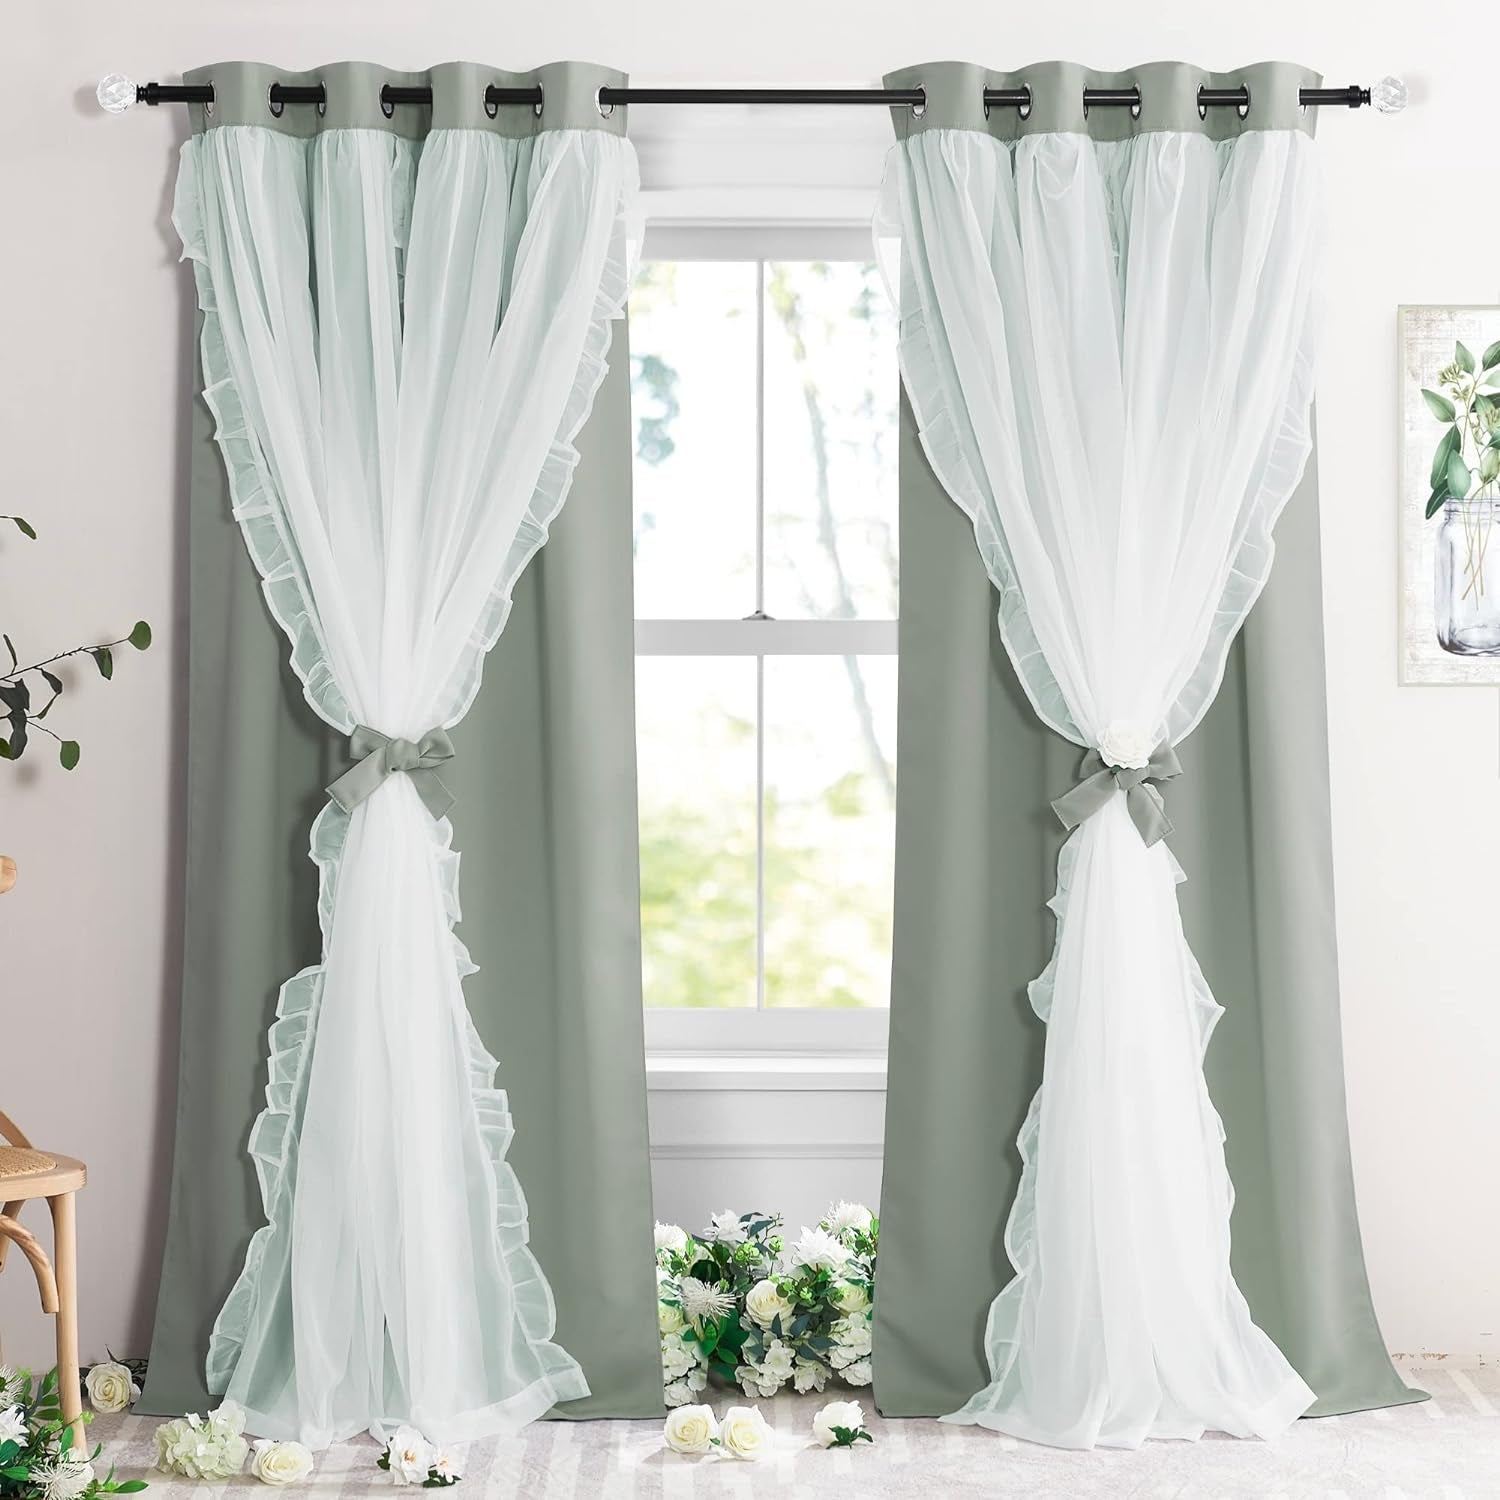 PONY DANCE Blackout Curtains for Living Room Decor Window Treatment Double Layer Drapes Ruffle Sheer Overlay Farmhouse Rustic Design, W 52 X L 84 Inches, Sage Green, 2 Panels  PONY DANCE   